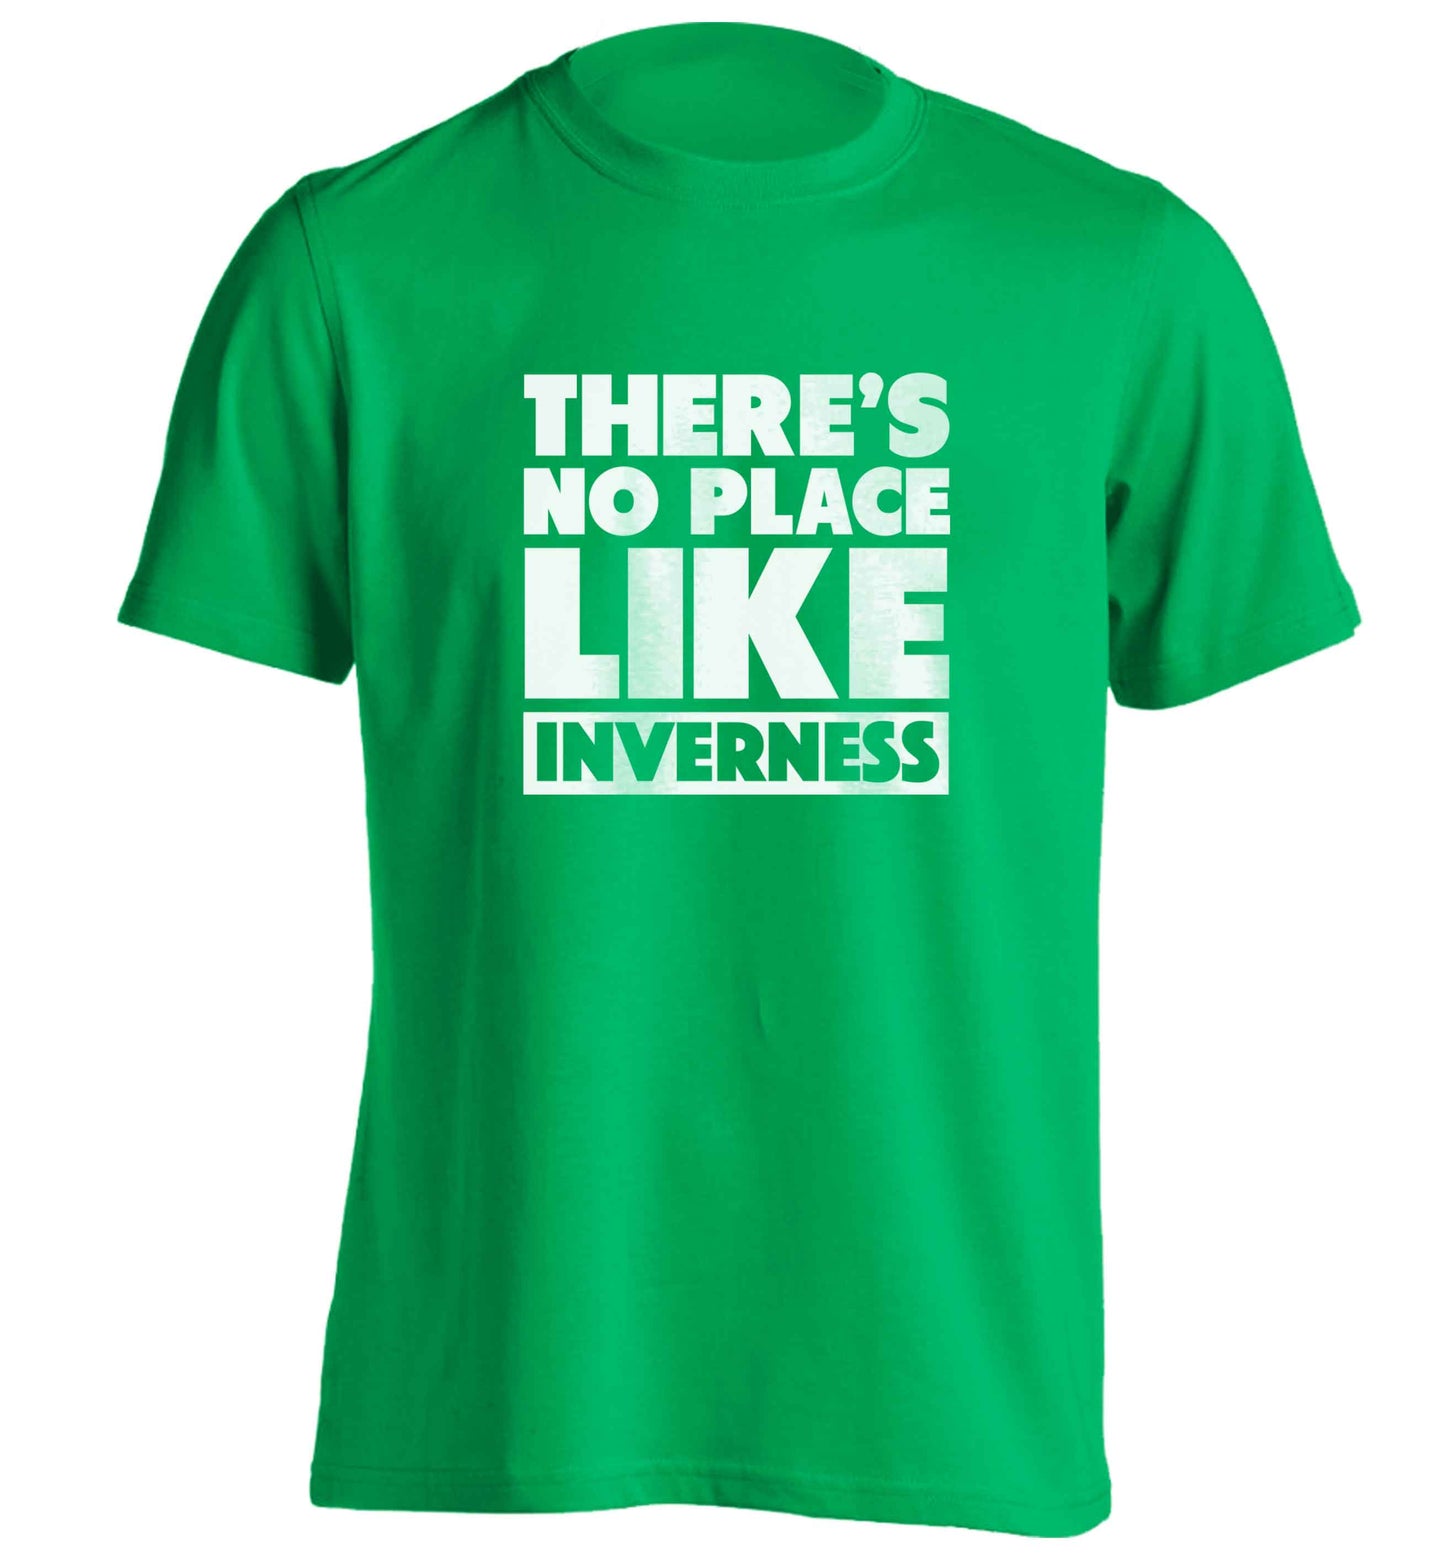 There's no place like Inverness adults unisex green Tshirt 2XL